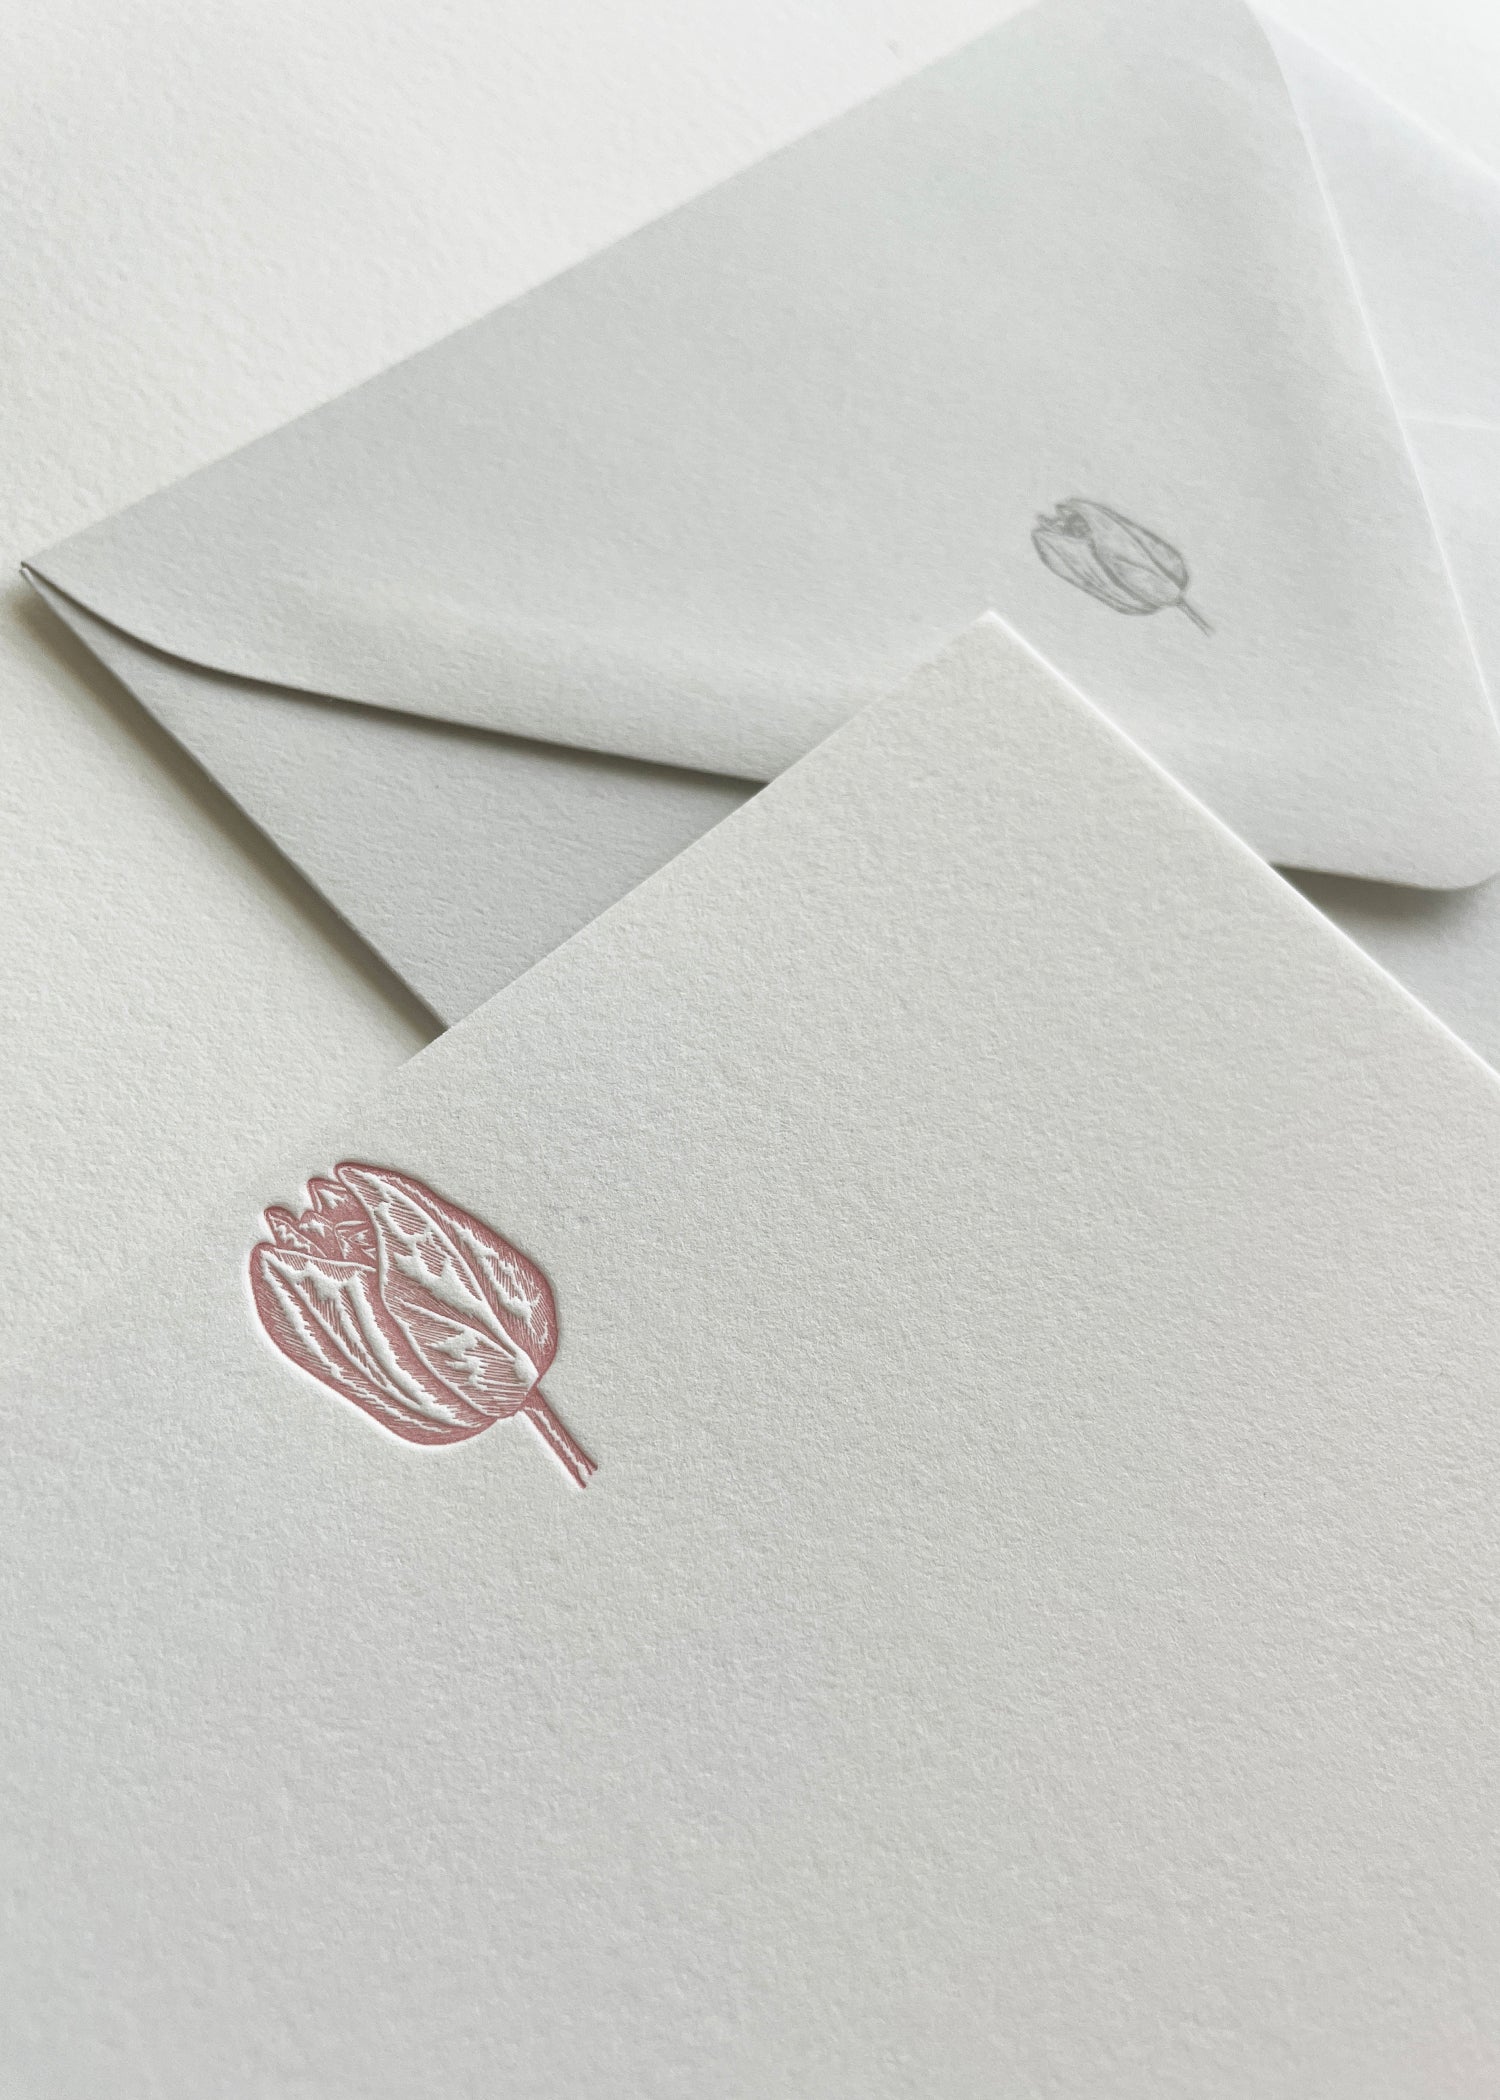 Letterpress flat note card with a red rose by Rust Belt Love